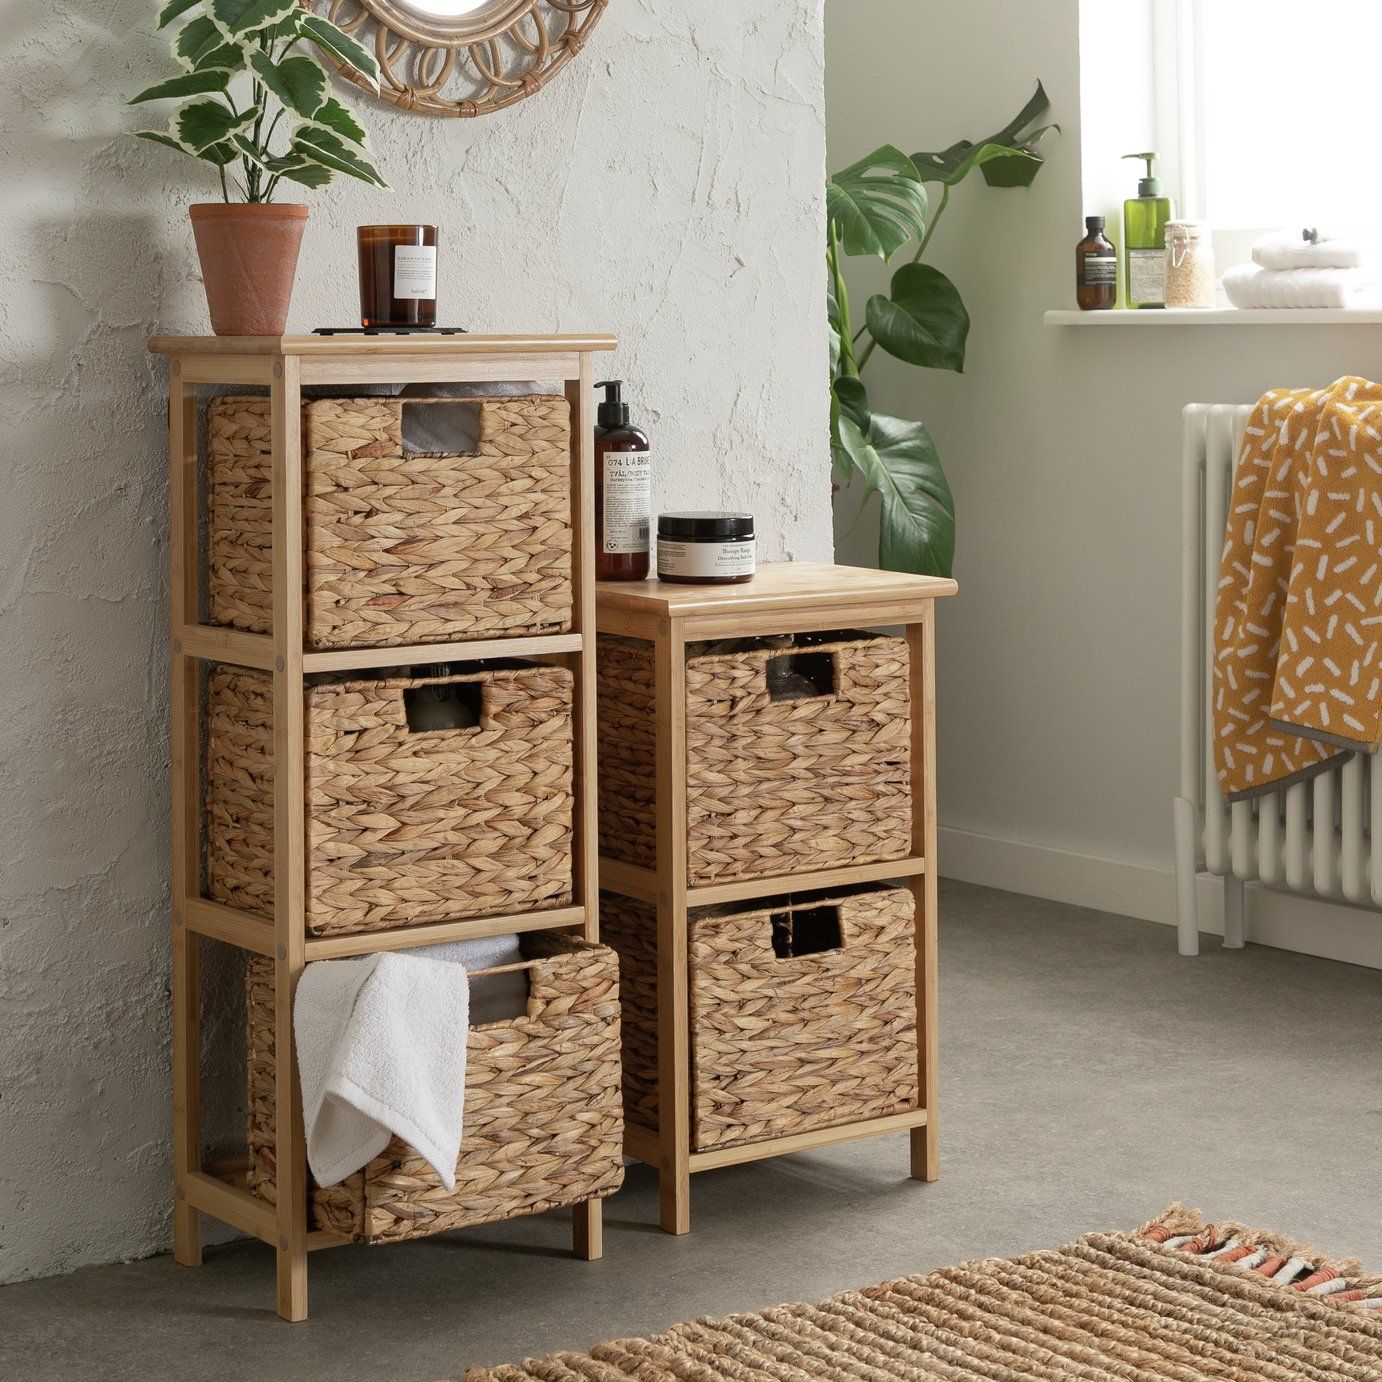 The Ultimate Guide to Organizing Your Bathroom with Storage Shelves and Baskets